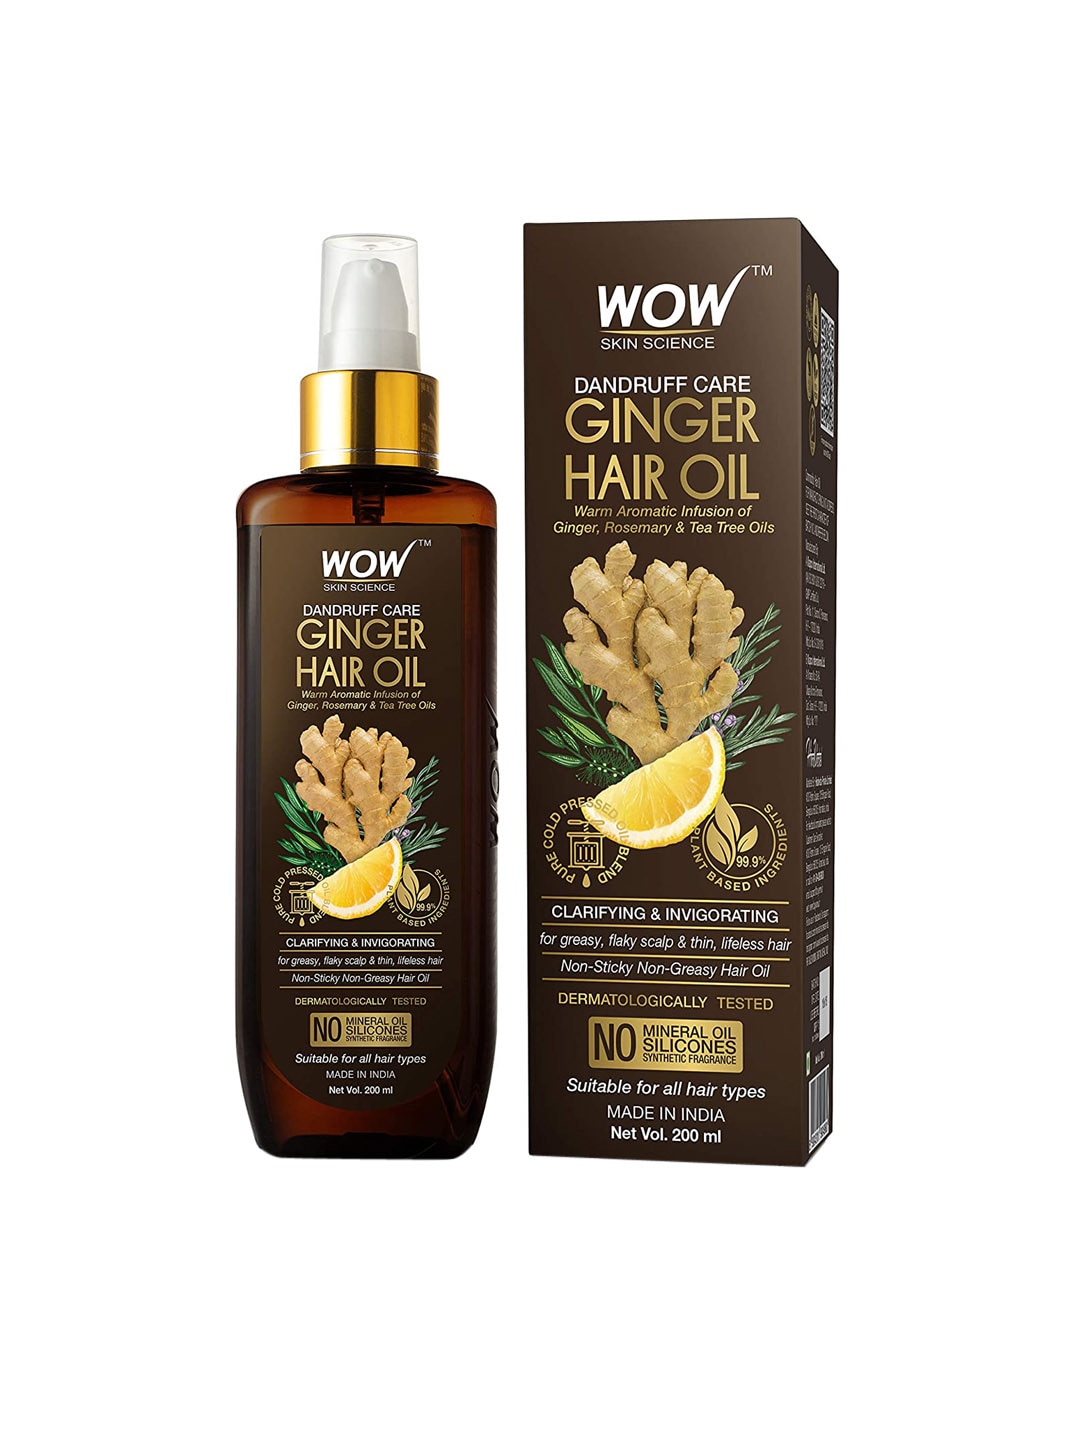 WOW SKIN SCIENCE Dandruff Care Ginger Hair Oil with Comb Applicator - 200ml Price in India